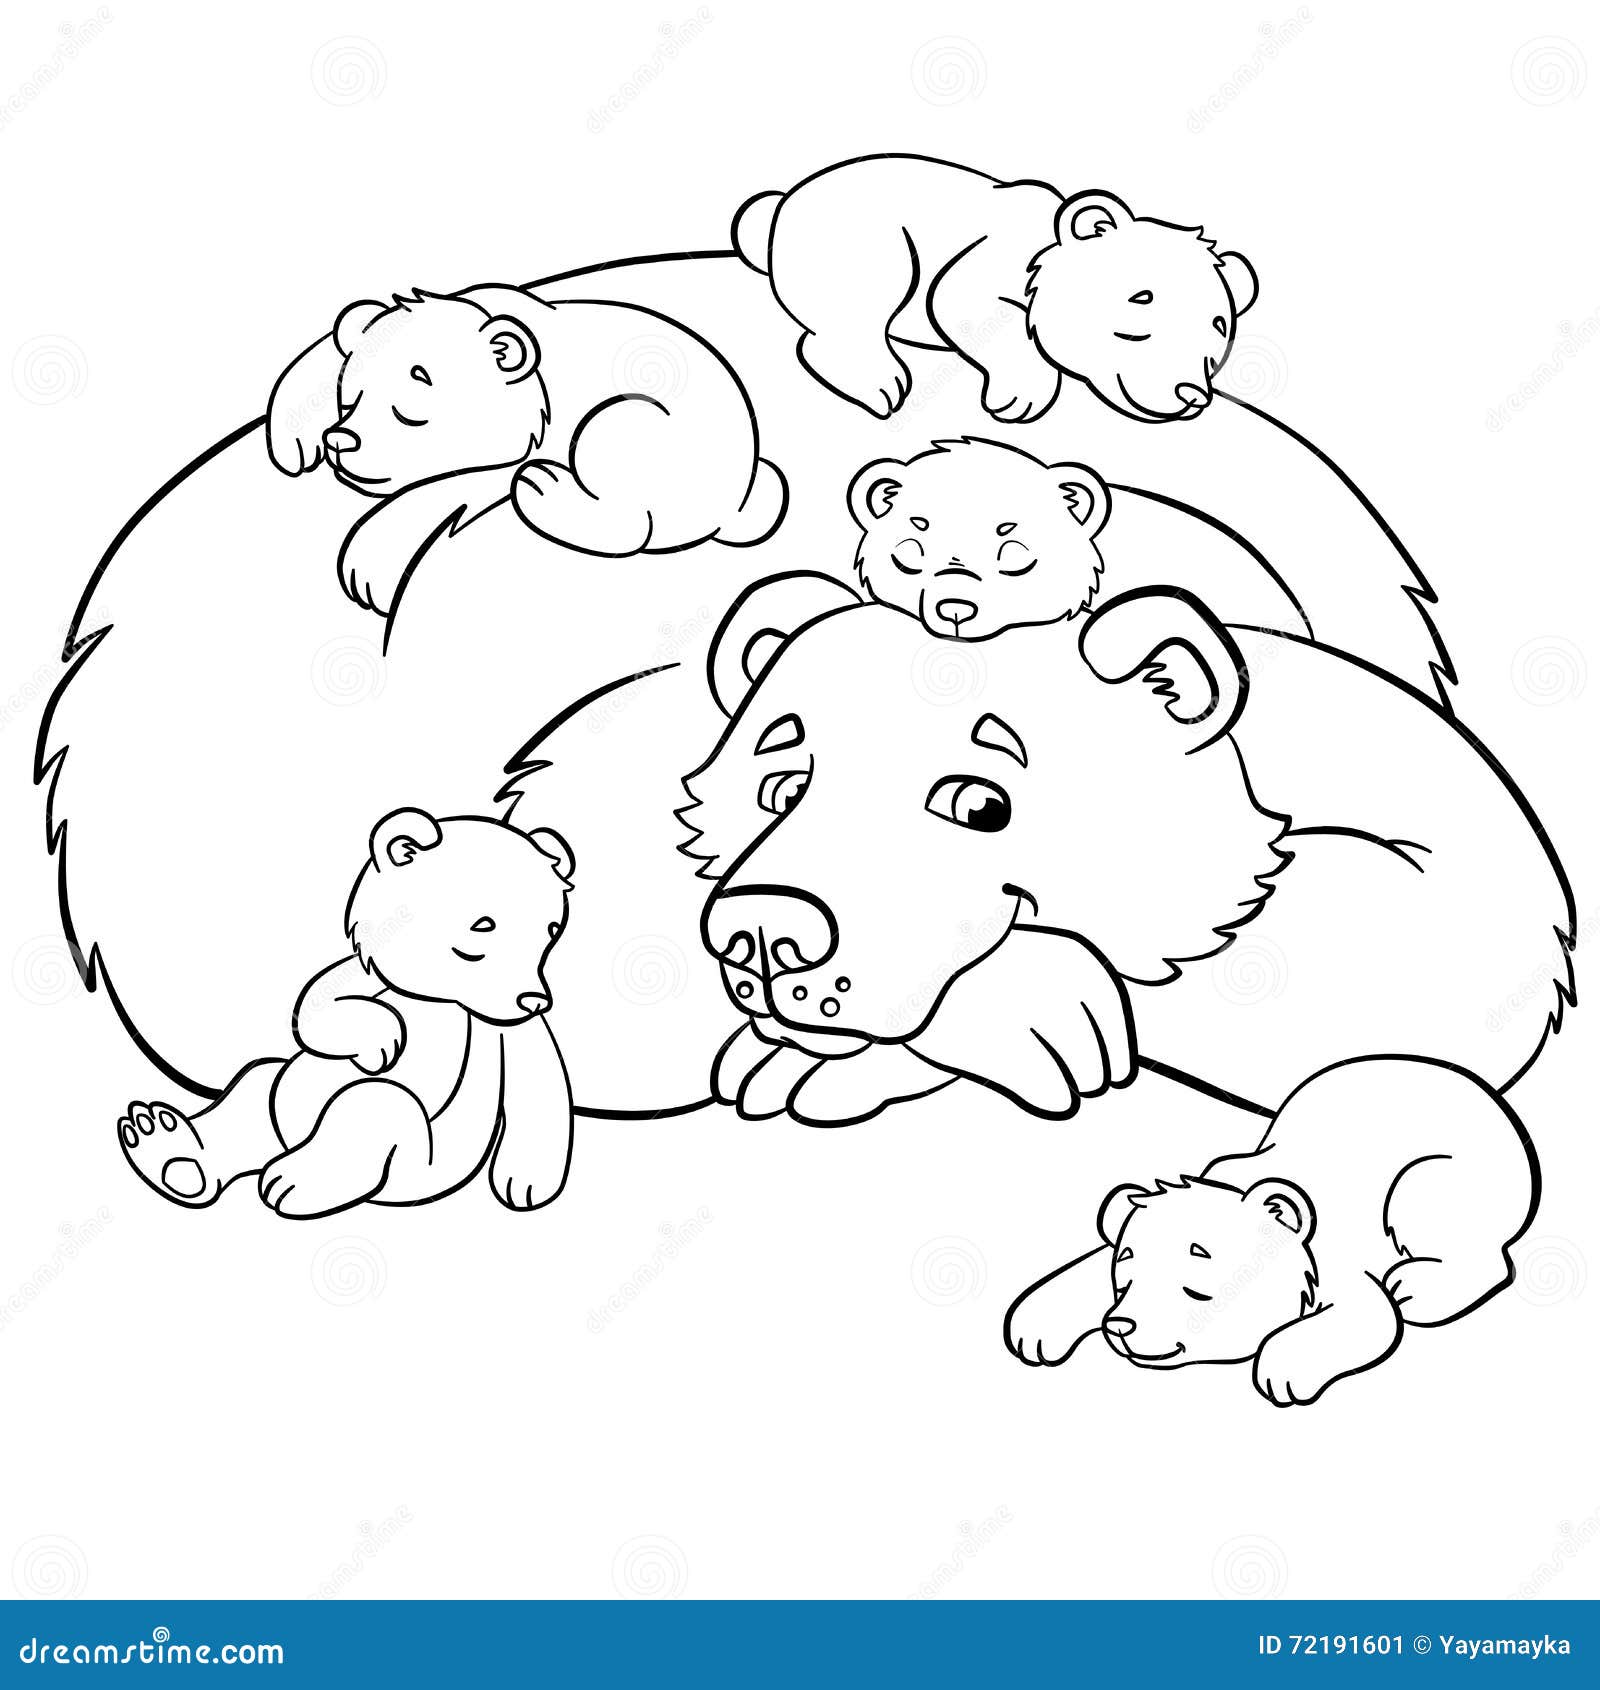 Coloring pages wild animals stock vector